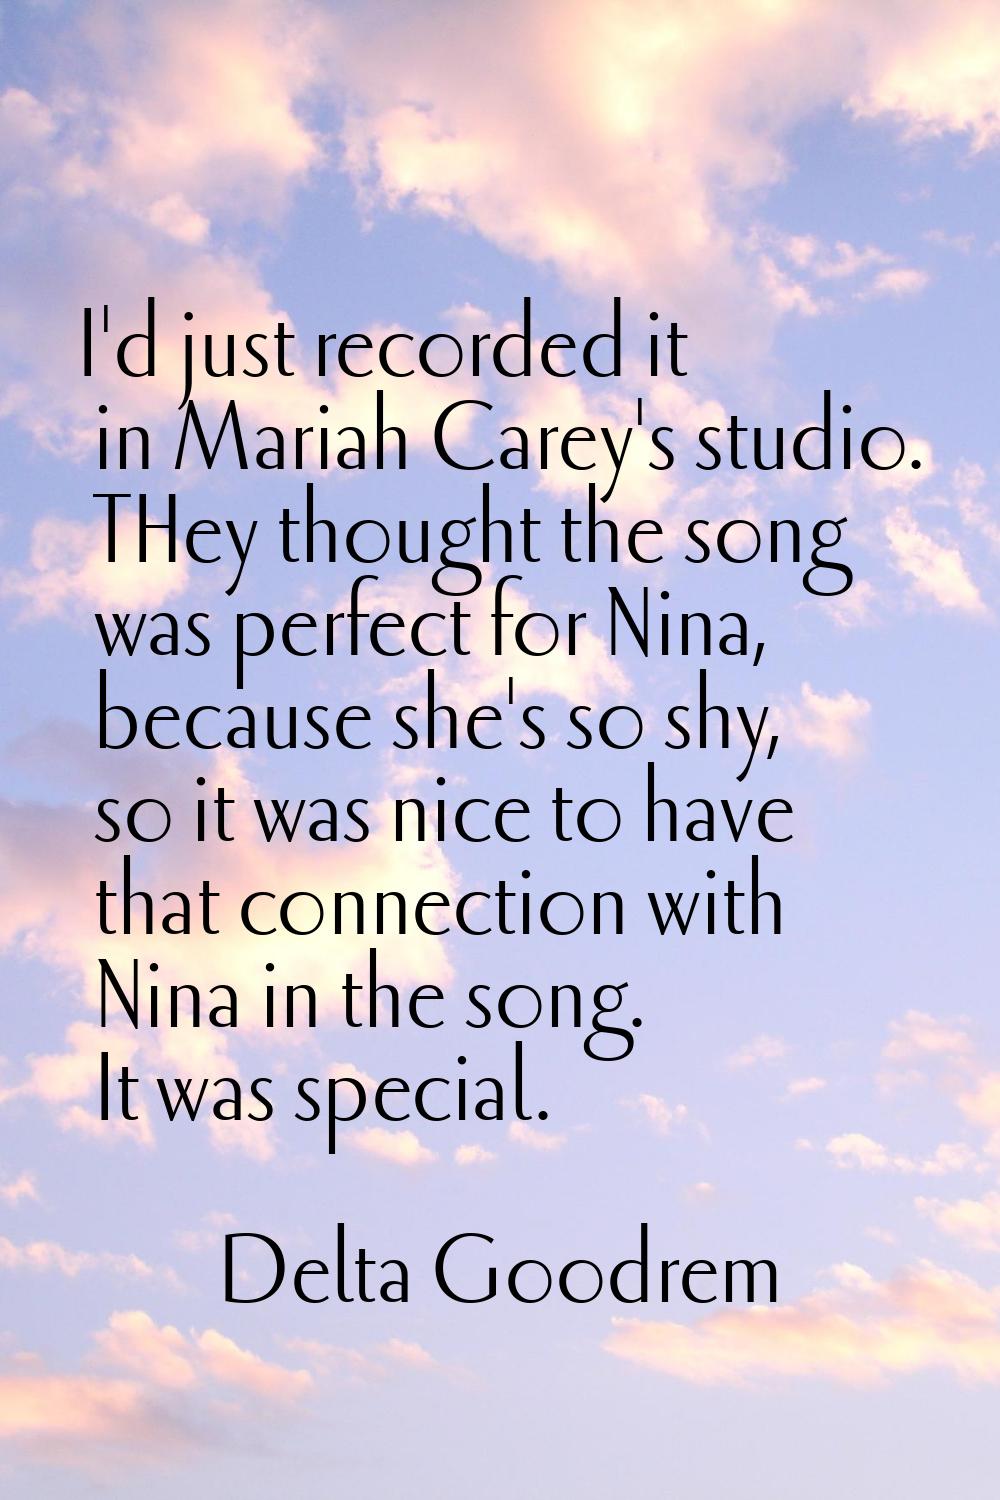 I'd just recorded it in Mariah Carey's studio. THey thought the song was perfect for Nina, because 